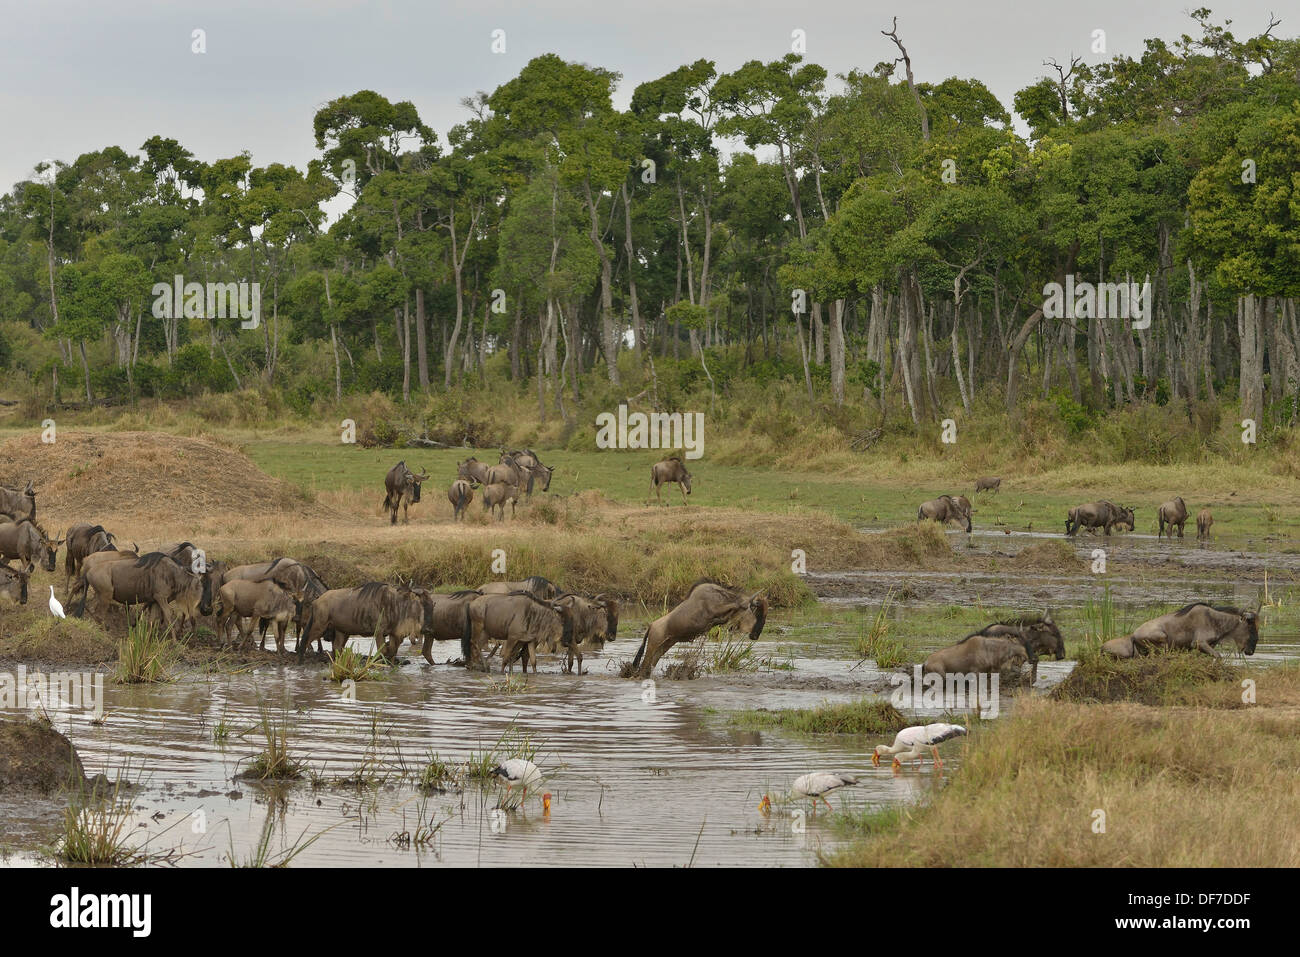 Eastern wildebeest (Connochaetes taurinus albojubatus) crossing a water hole pool on the Mara River in the Great Migration Stock Photo